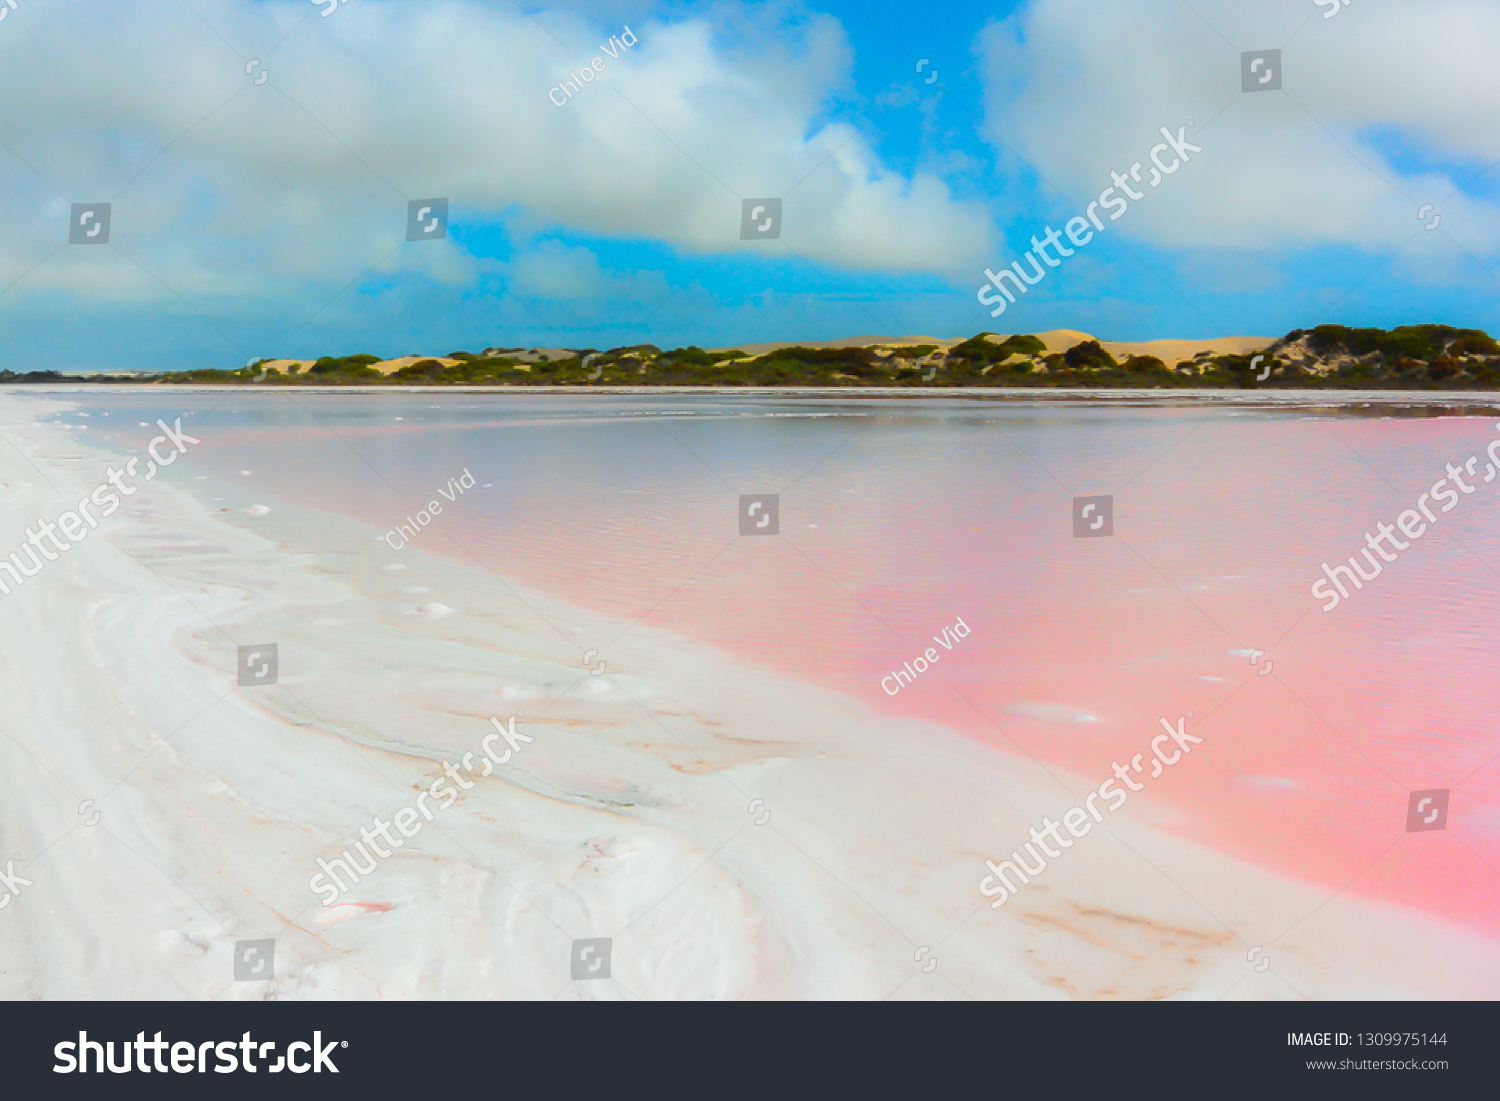 Beautiful pink lake Hillier in Western Australia, salt water and natural colorful landscape against cloudy blue sky and the reflection on soft smooth water. #1309975144